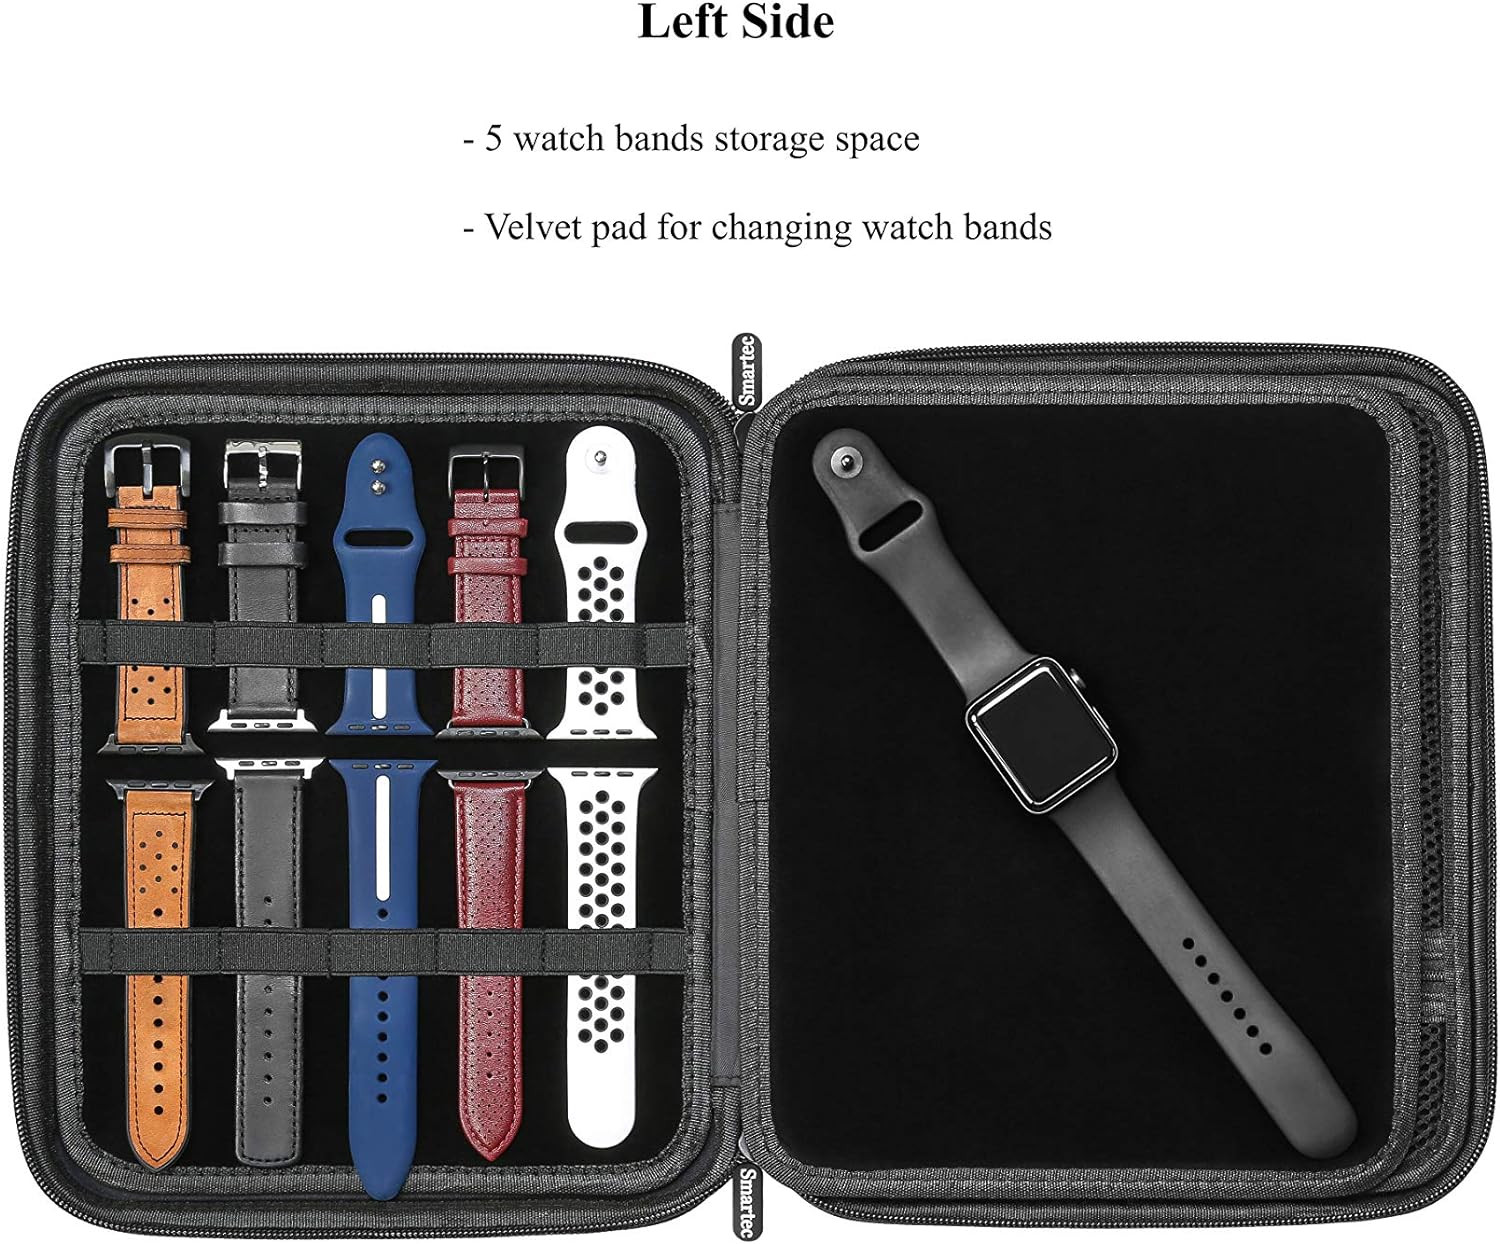 SMARTEC Smart Watch Bands & Accessories Travel/Storage Case: The Ultimate Solution for Organizing Your Watch Bands